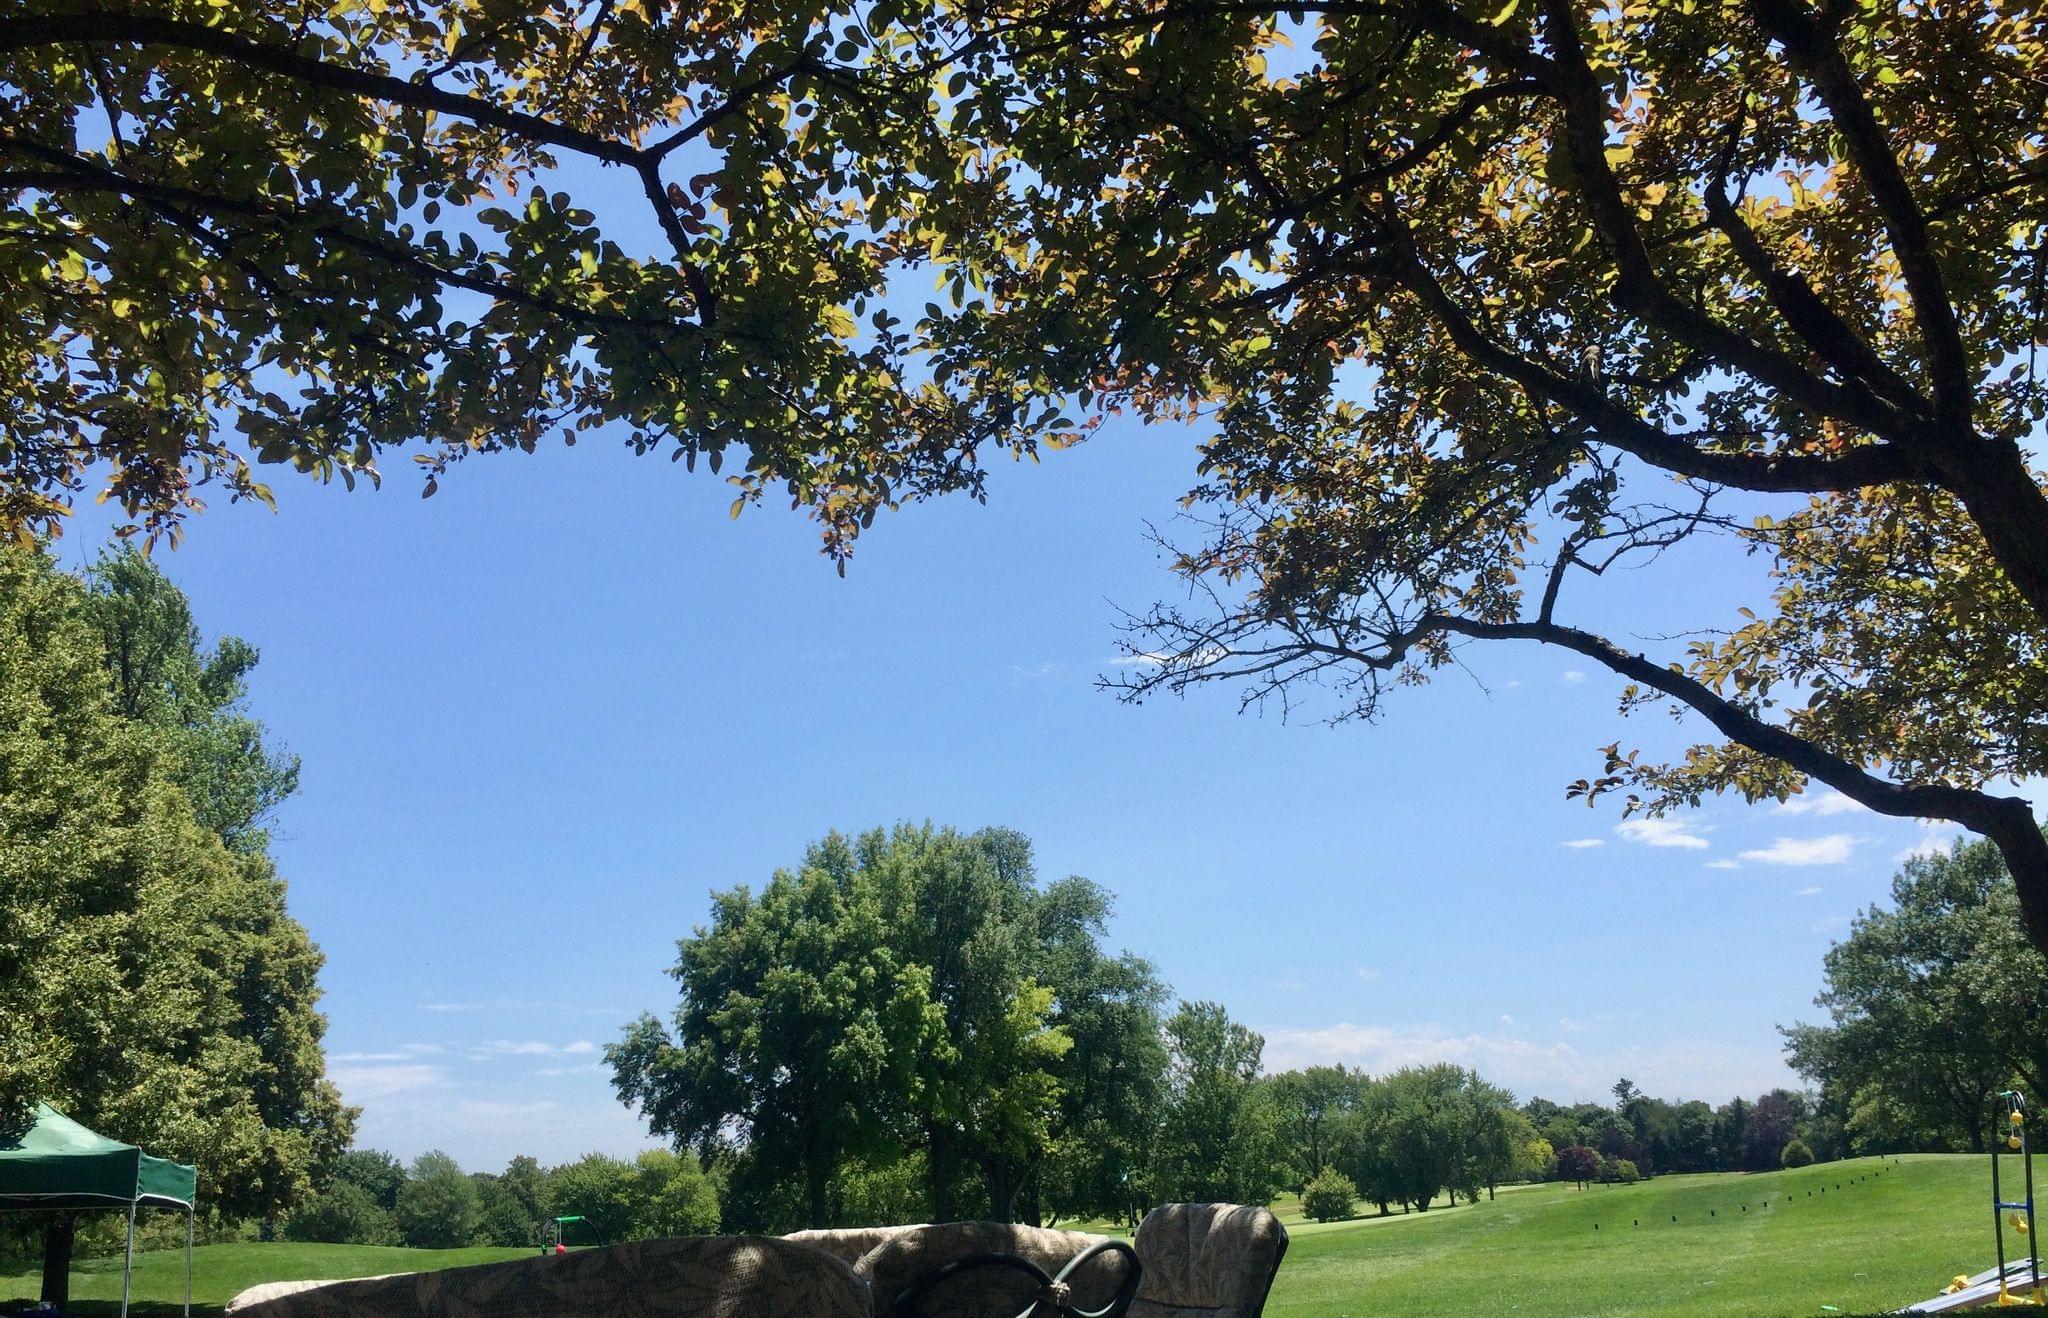 Ruminate began on a sunny day at a Chicago country club.